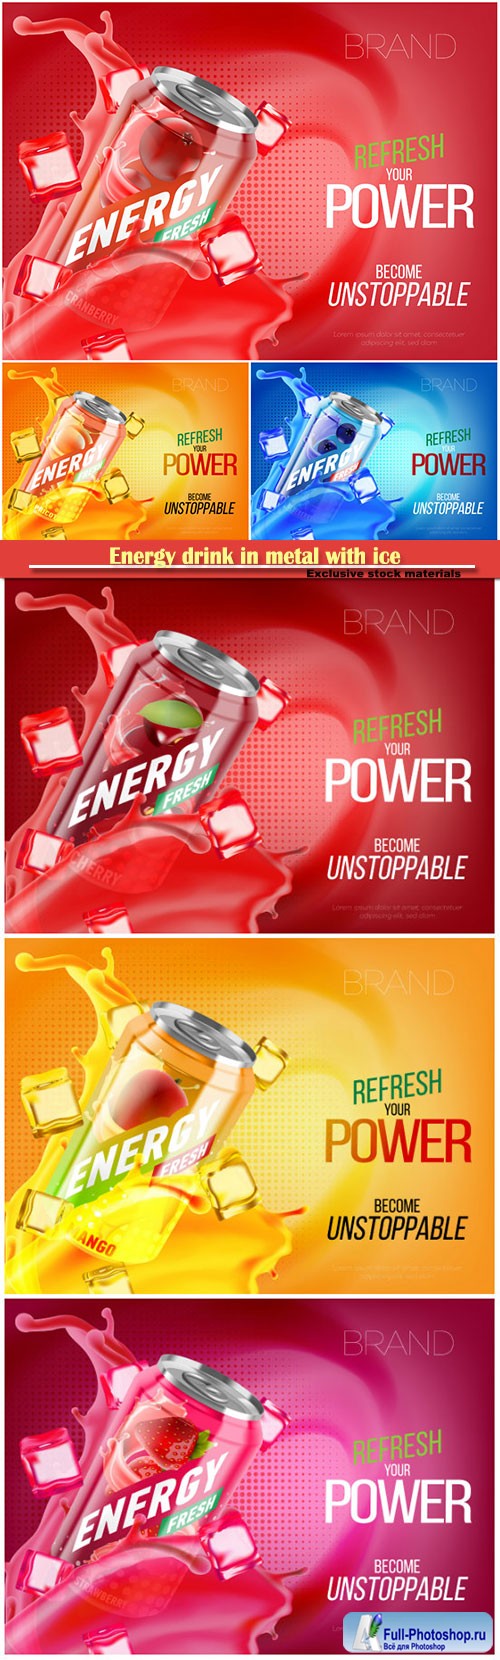 Energy drink in metal with ice and juice splash advertising vector banner